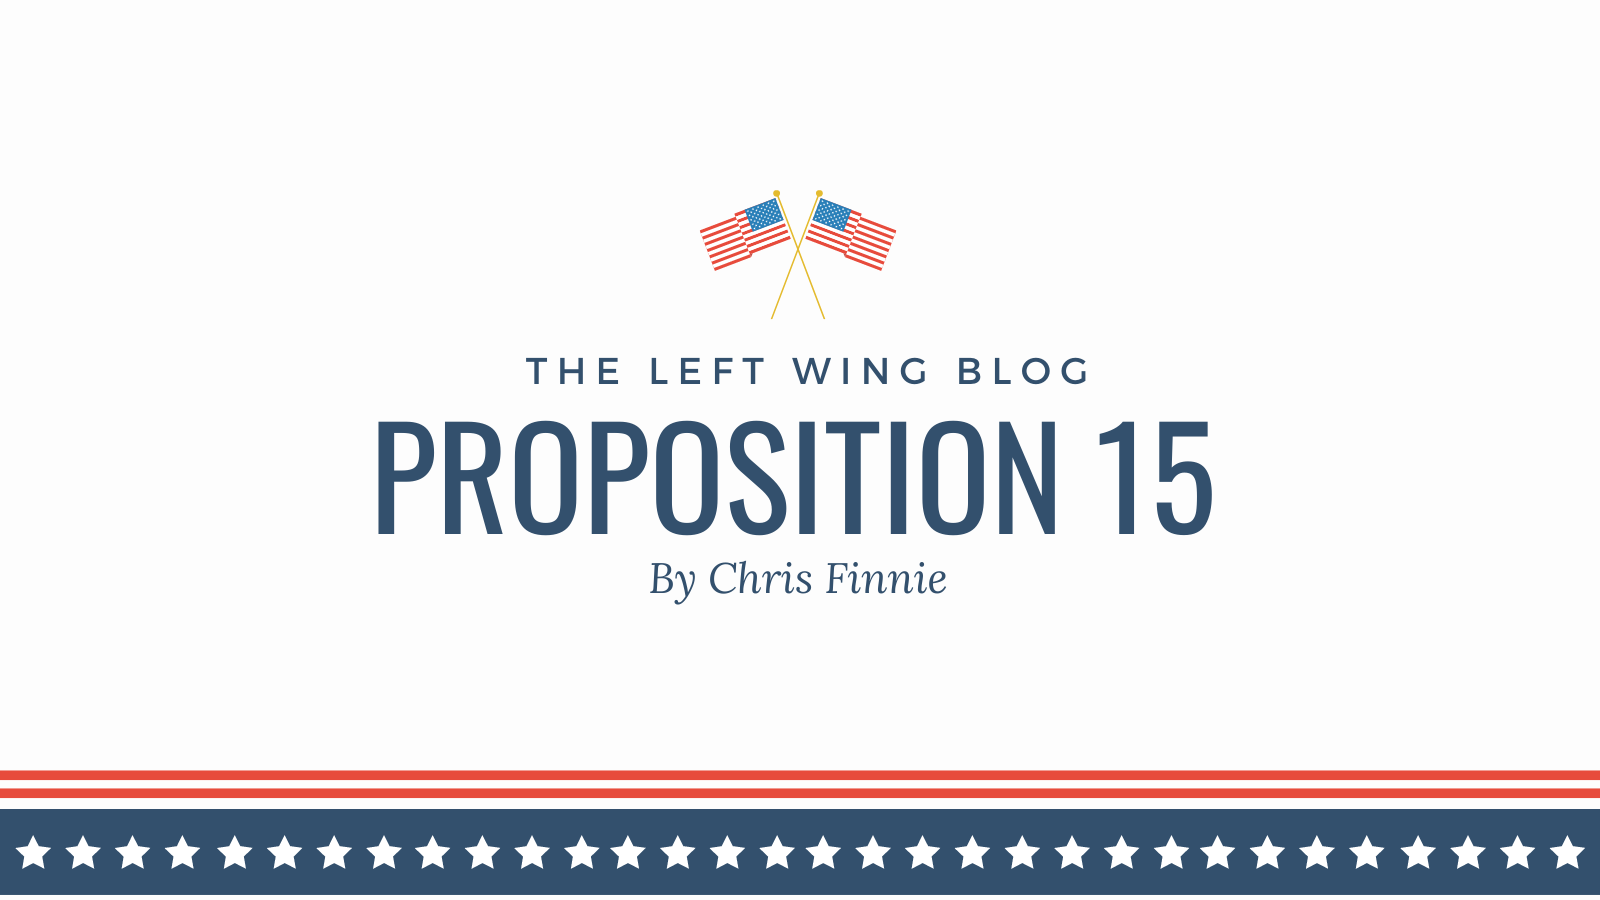 Chris Finnie on Proposition 15